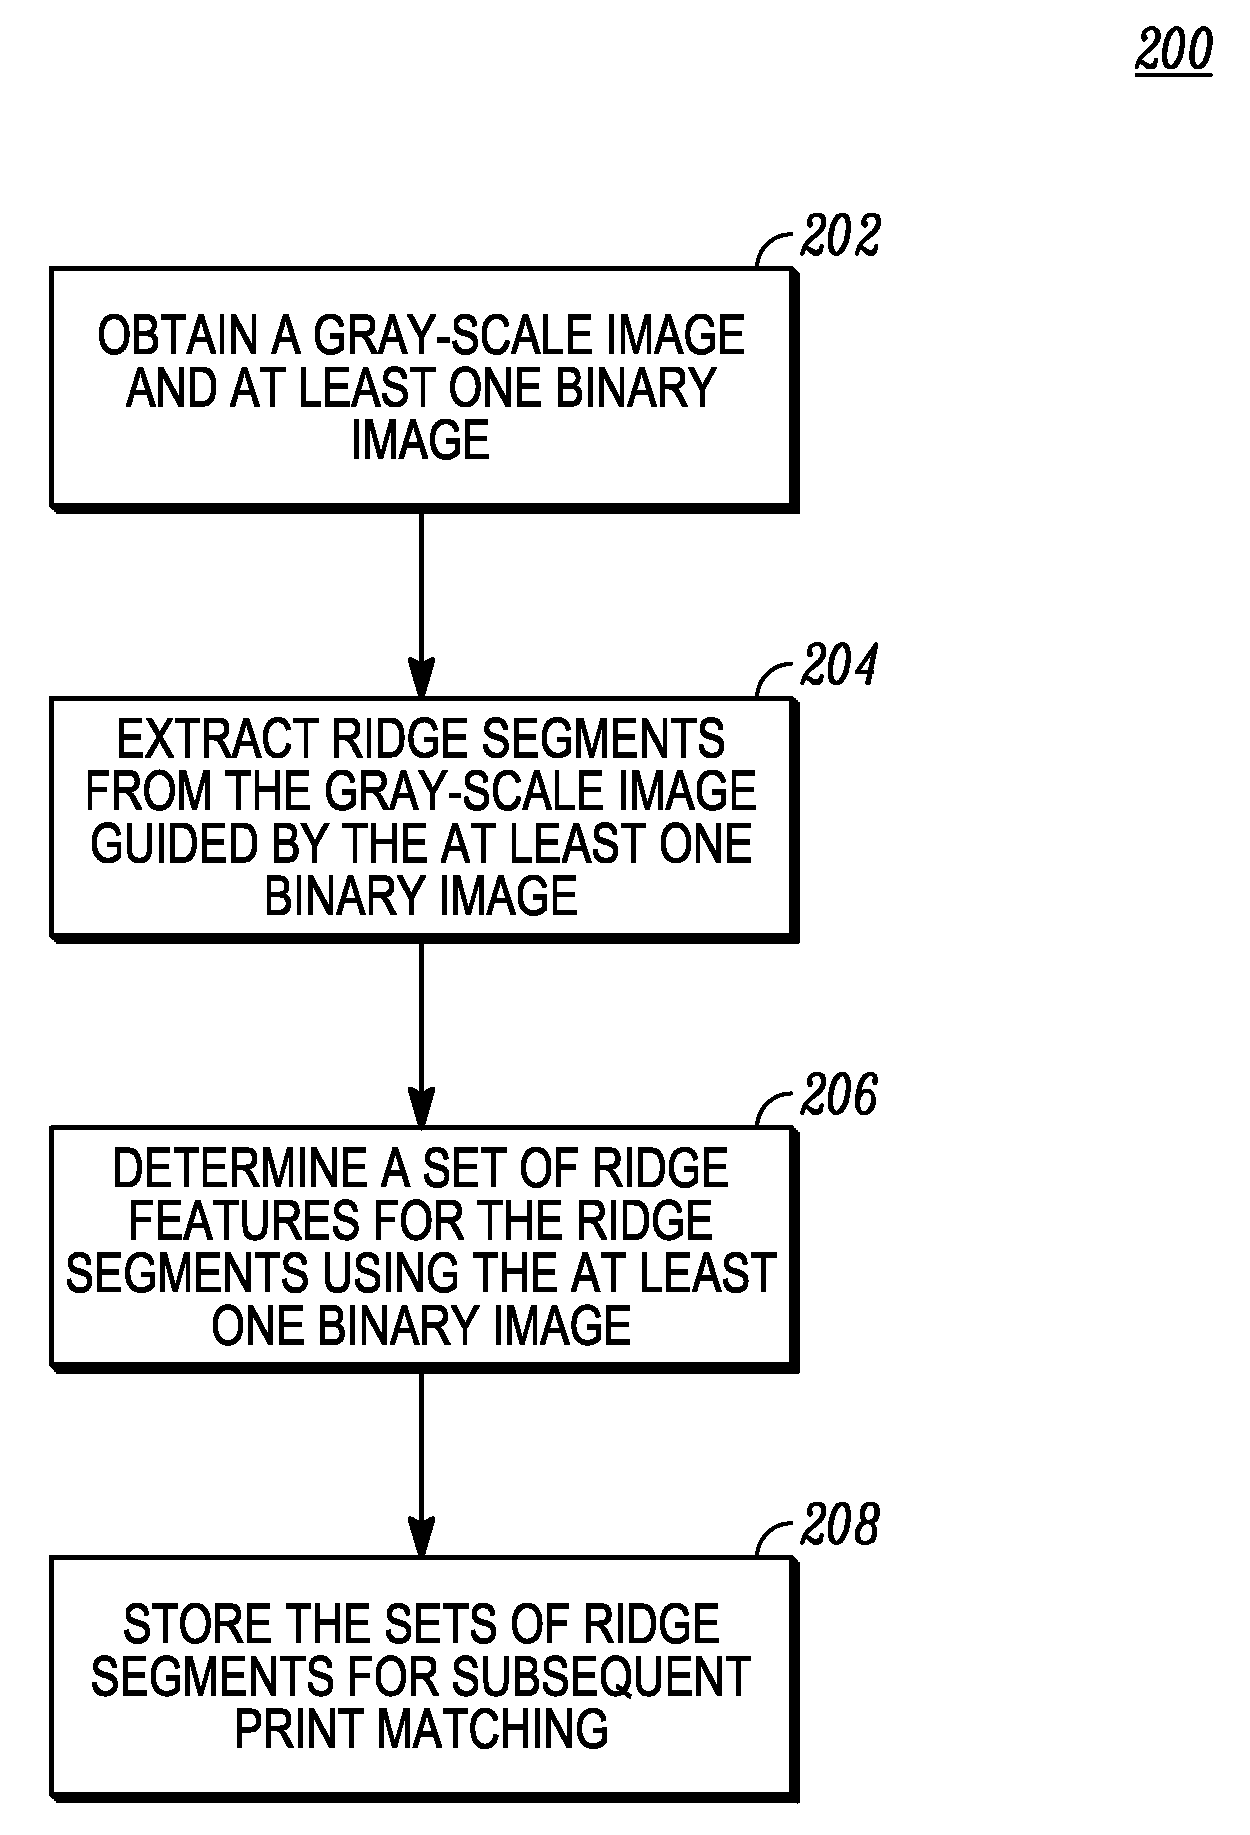 Methods for gray-level ridge feature extraction and associated print matching